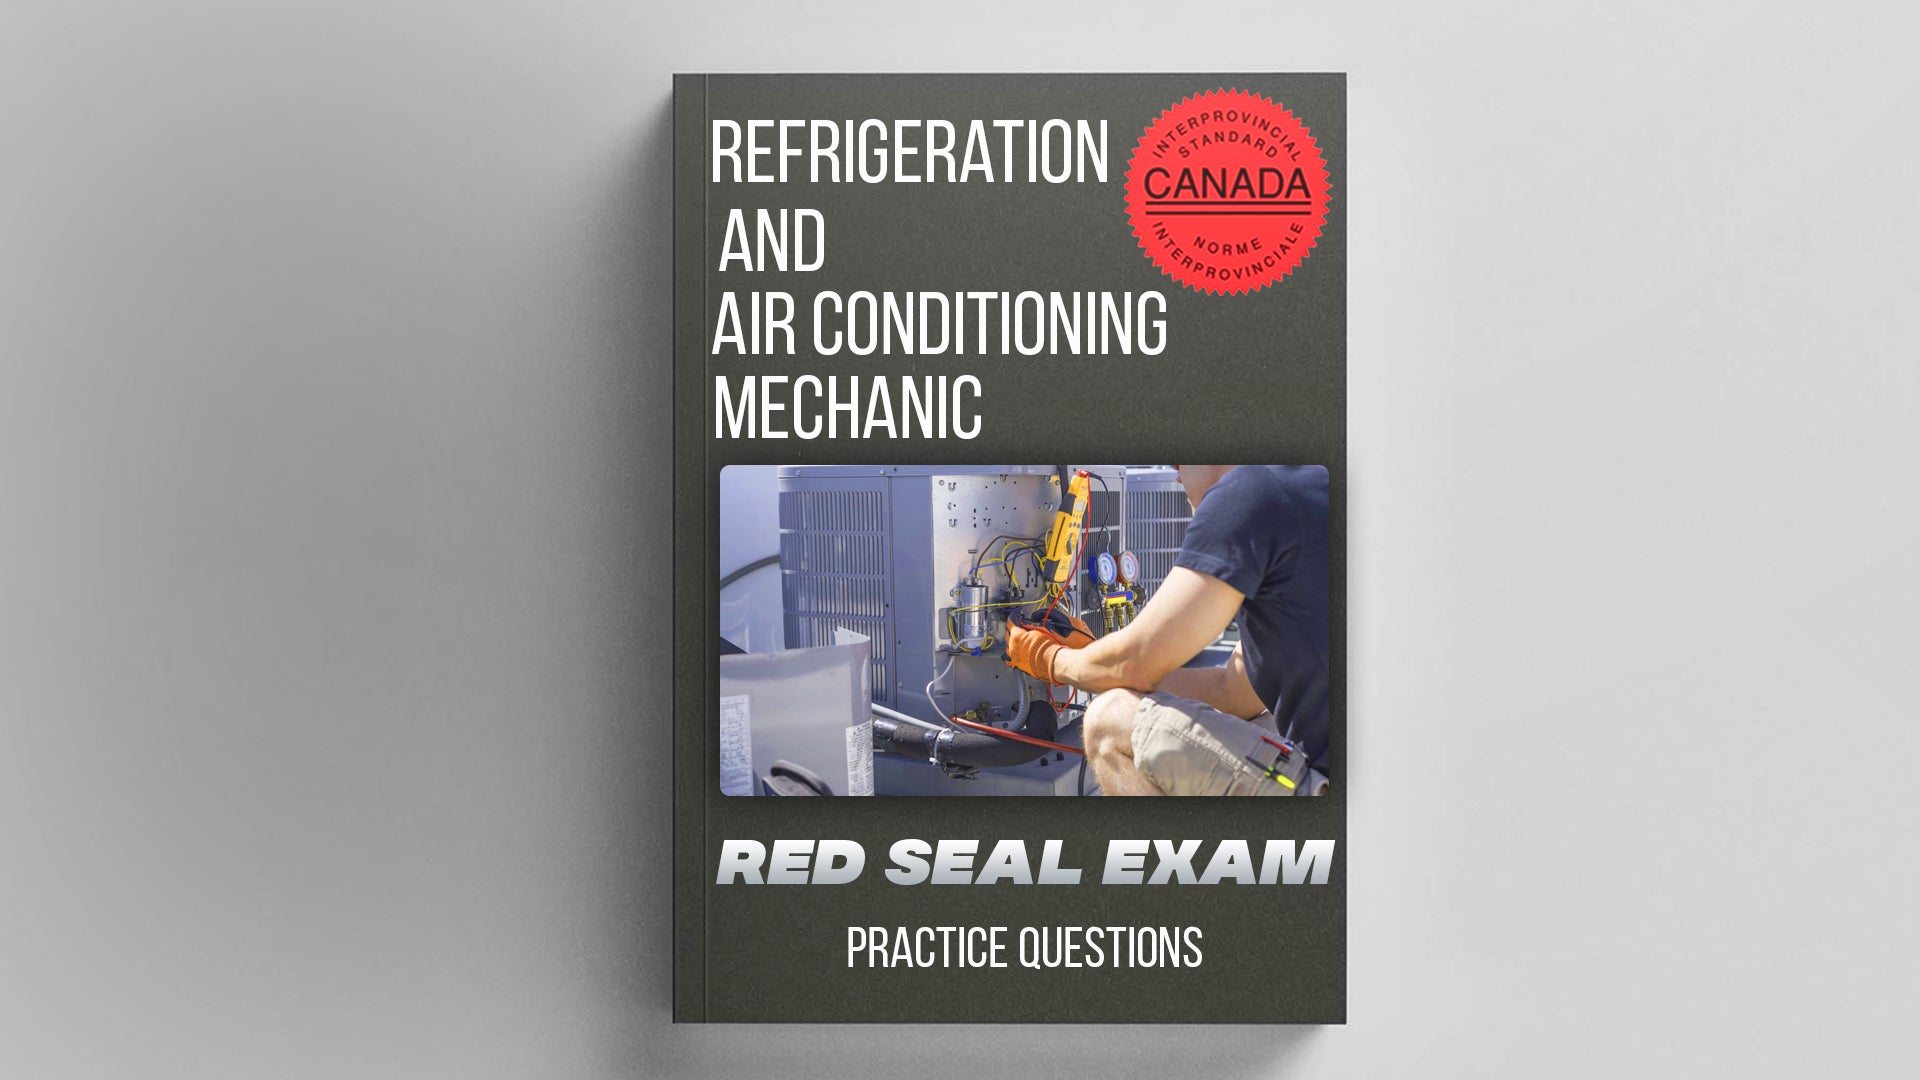 Refrigeration and Air Conditioning Mechanic Red Seal Exam